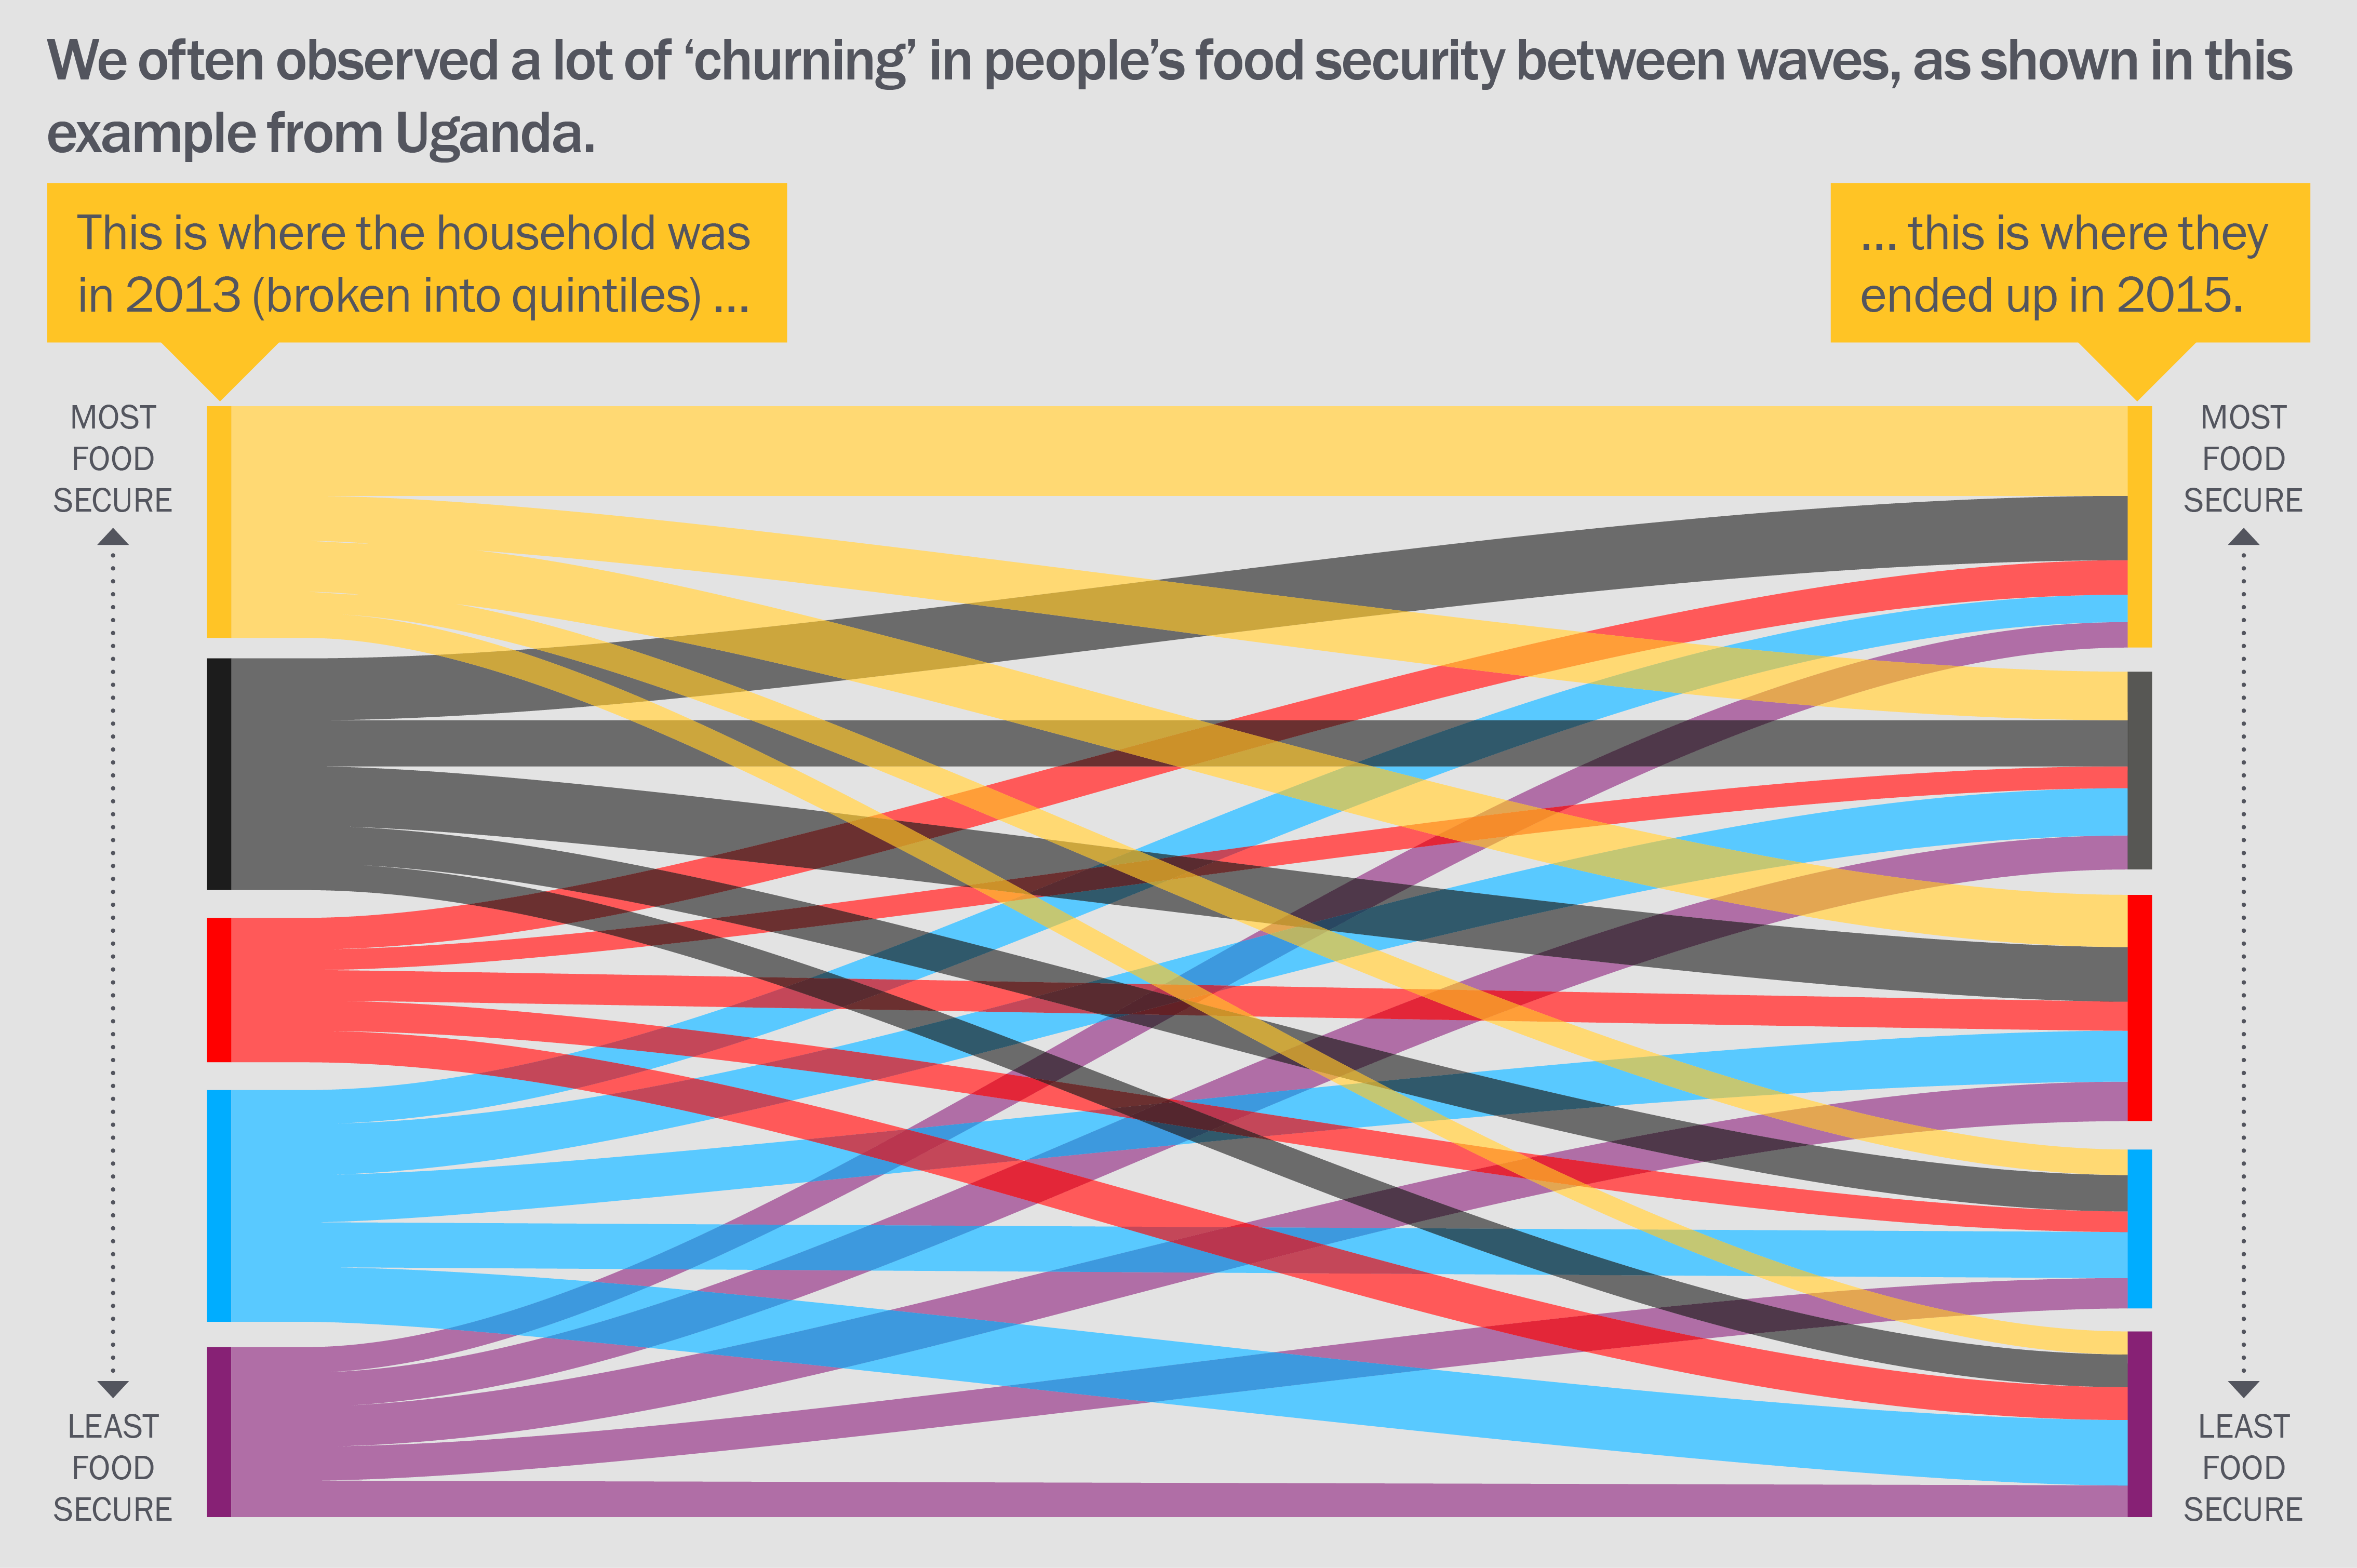 We often observed a lot of 'churning' in people's food security between waves, as shown in this example from Uganda